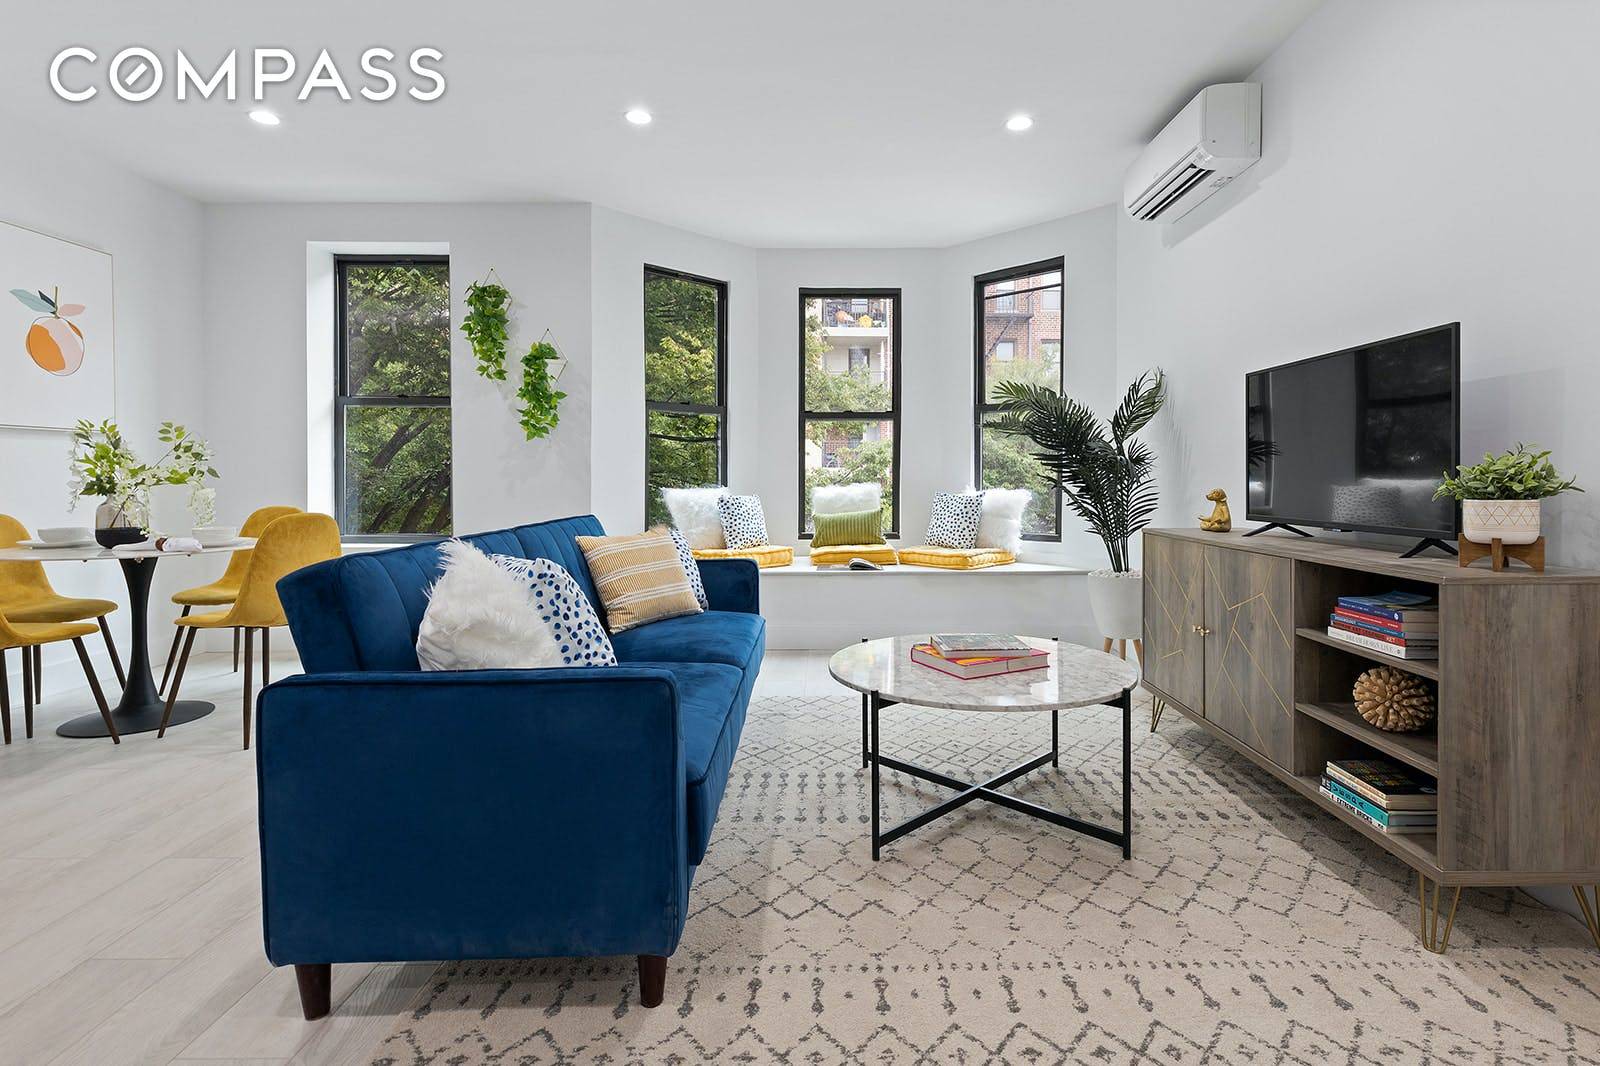 Welcome to 54 Martense Condominium, the most exciting pre war condo conversion project in Prospect Park South.